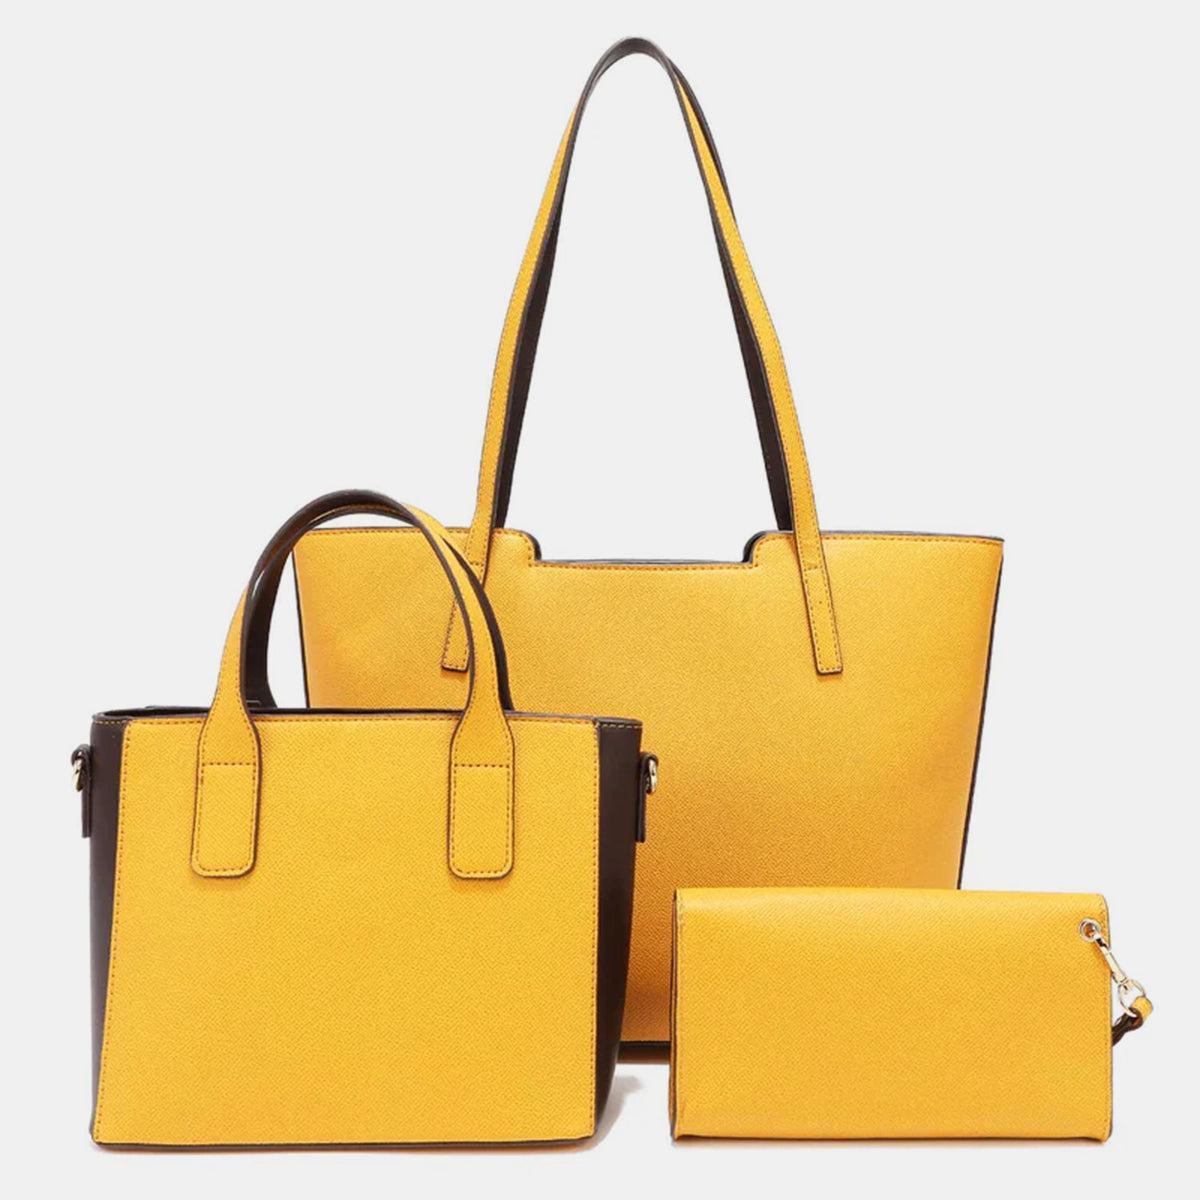 a yellow purse and wallet sitting next to each other